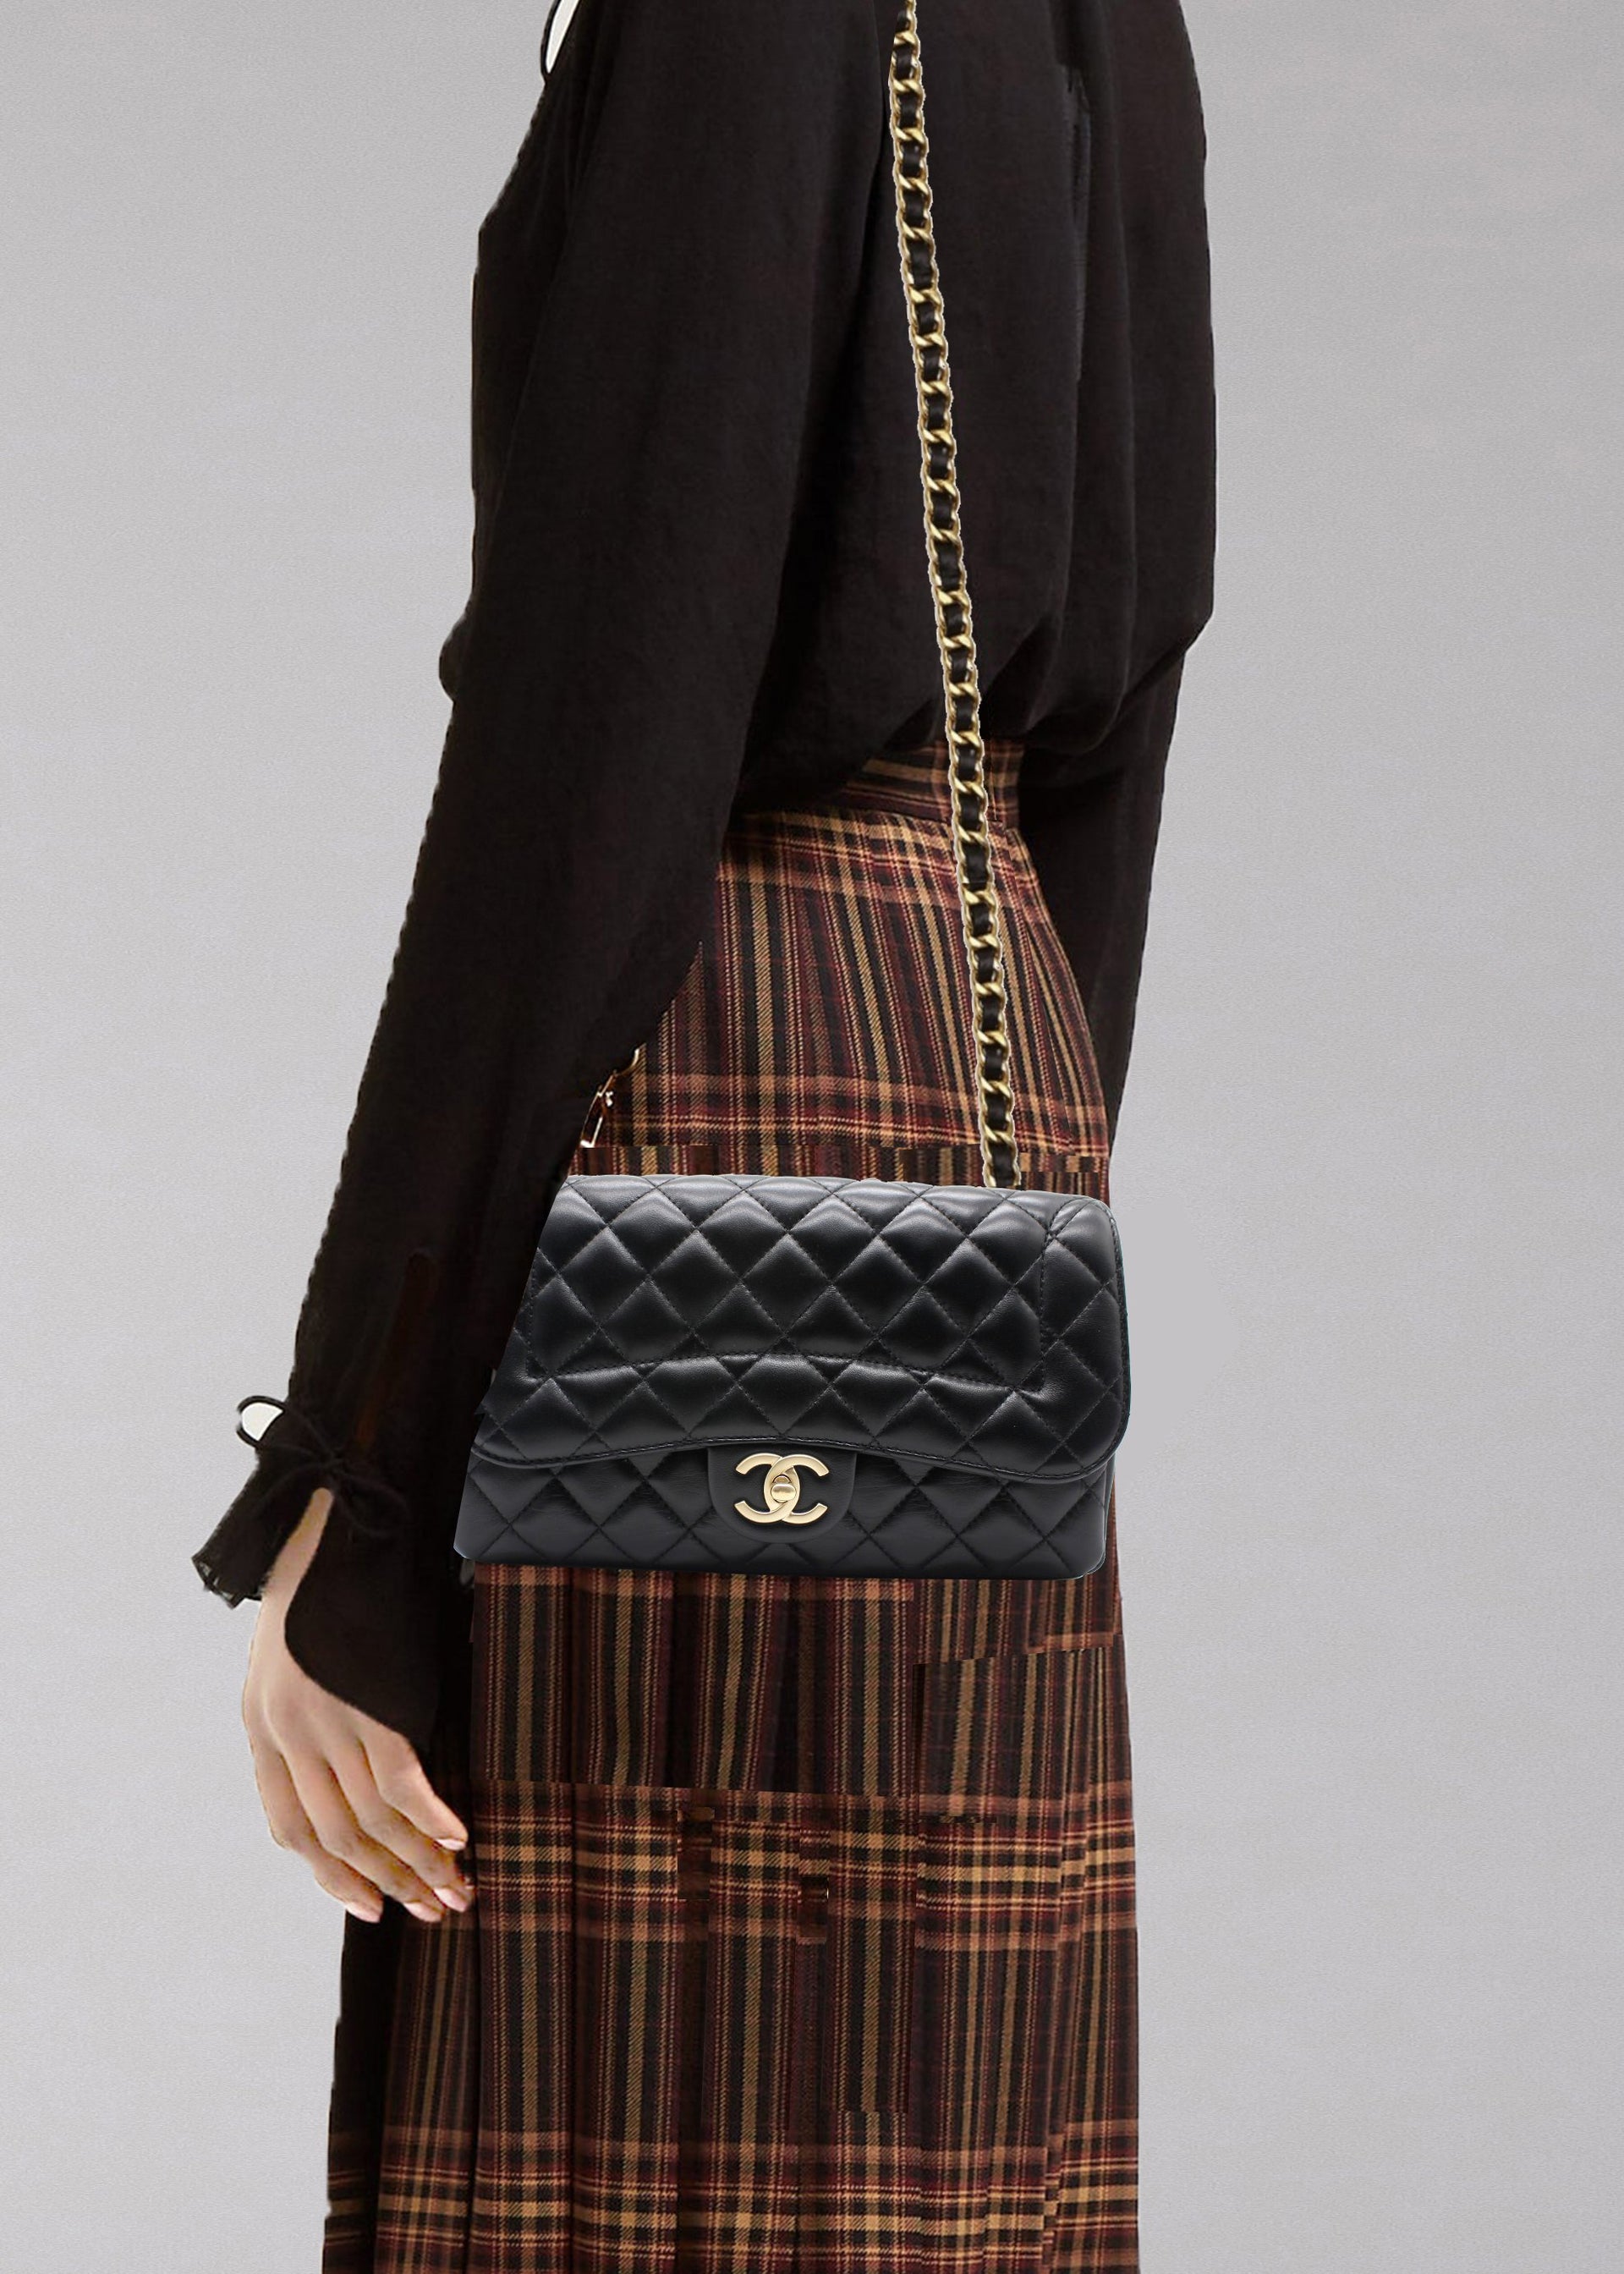 Chanel Lambskin Quilted Medium Mademoiselle Chic Flap Black